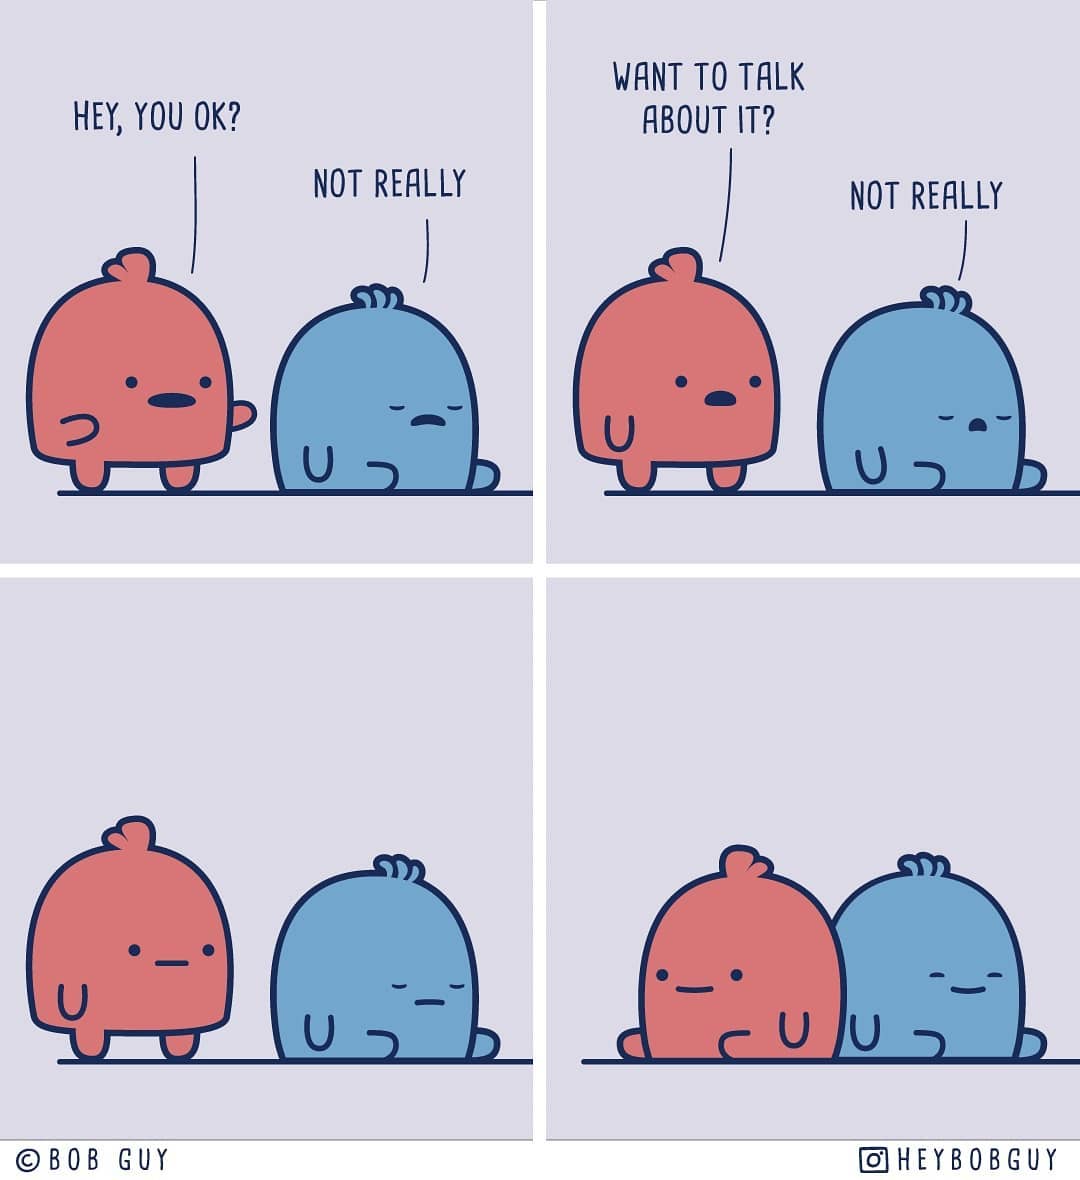 wholesome memes - wholesome meme instructions on how to cheer someone up - Want To Talk About It? Hey, You Ok? Not Really Not Really d Ujud Obob Guy O Heybobguy